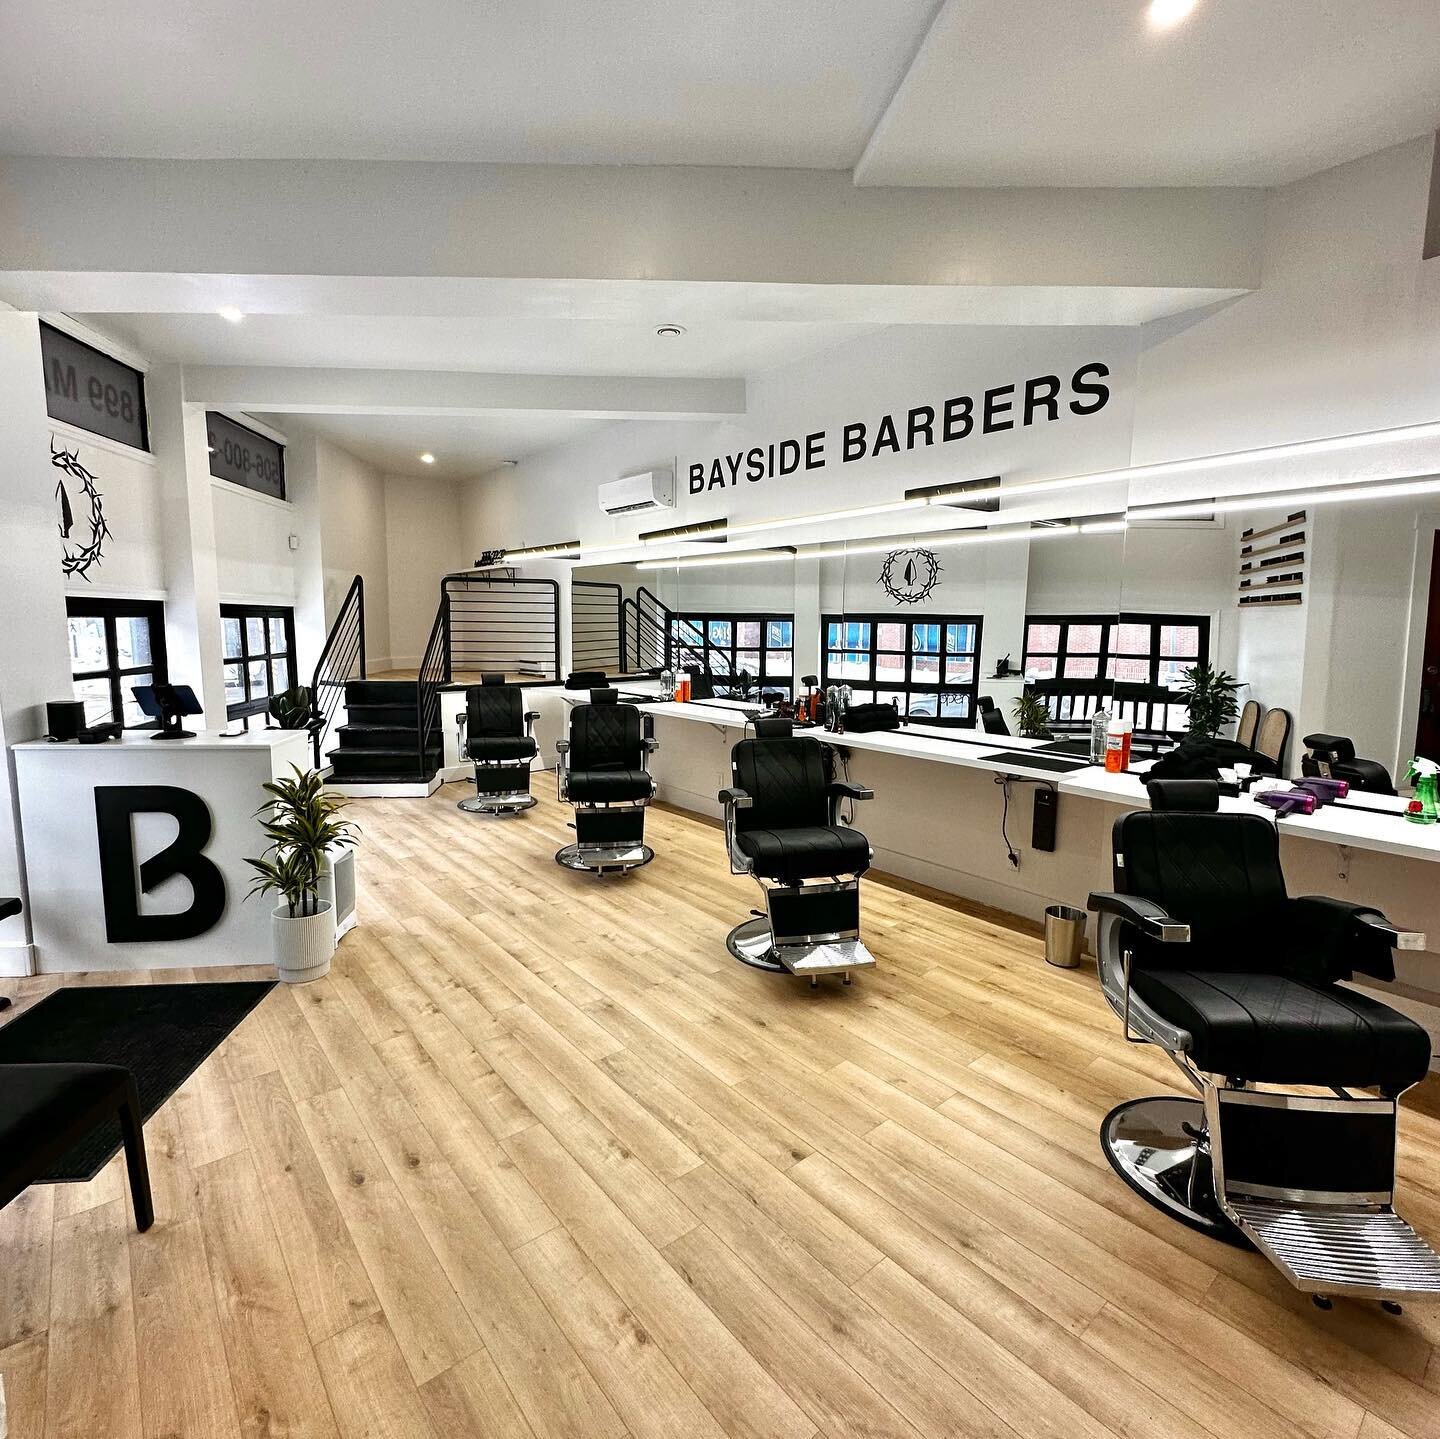 MONCTON IS OPEN // Your favourite new #moncton barbershop is now open 10am-7pm Tuesday to Saturday! Book online via www.baysidebarbers.ca or call 506-800-3428 💈 
.
.
#downtownmoncton #explorenb #monctonnb #discovernb